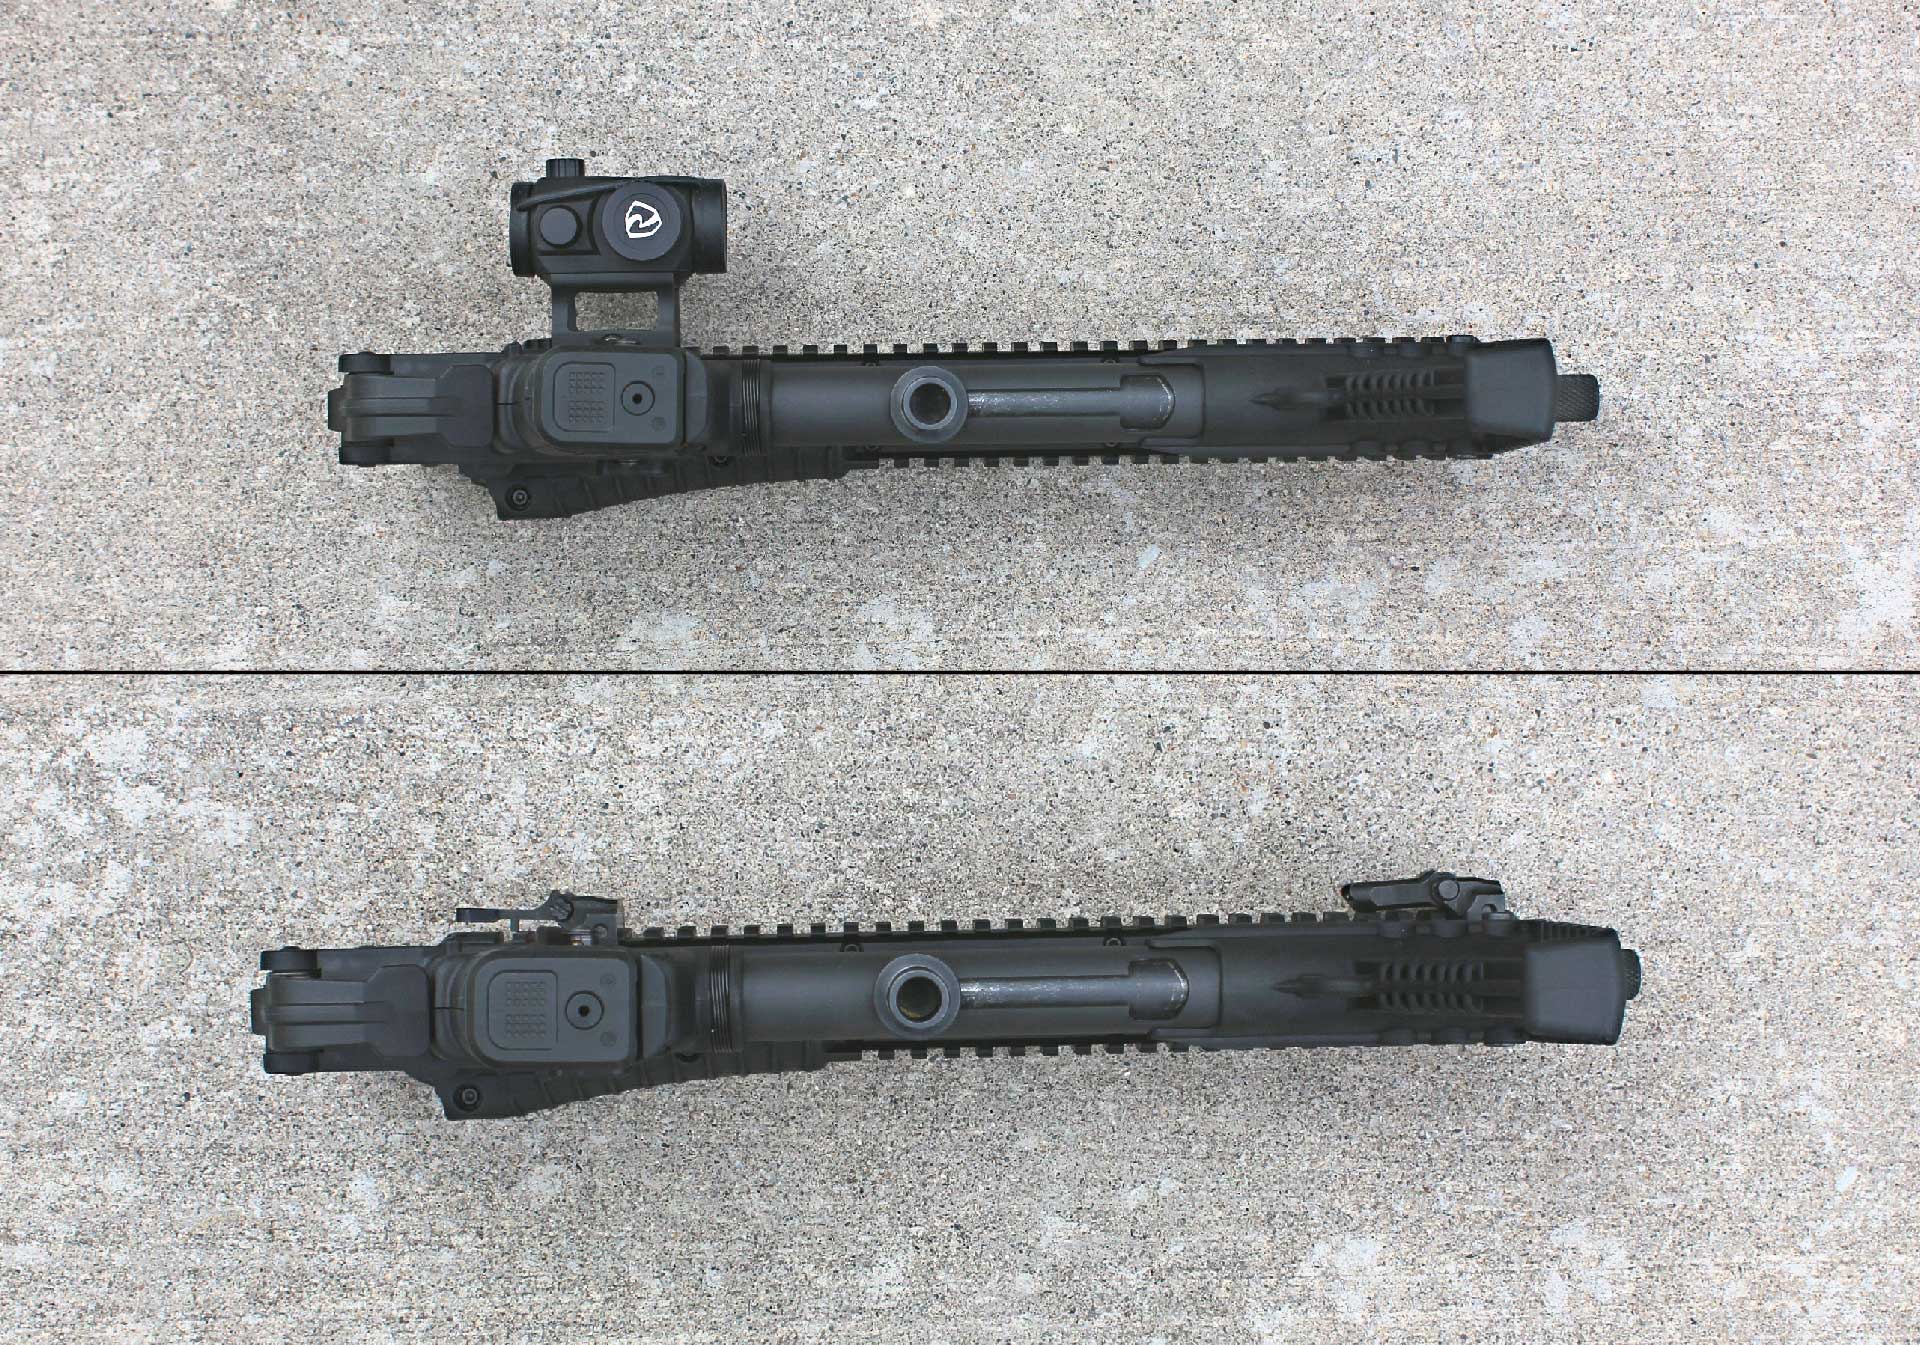 A bottom view of the KelTec SUB2000 GEN3 carbine fully folded with a red-dot optic mounted.